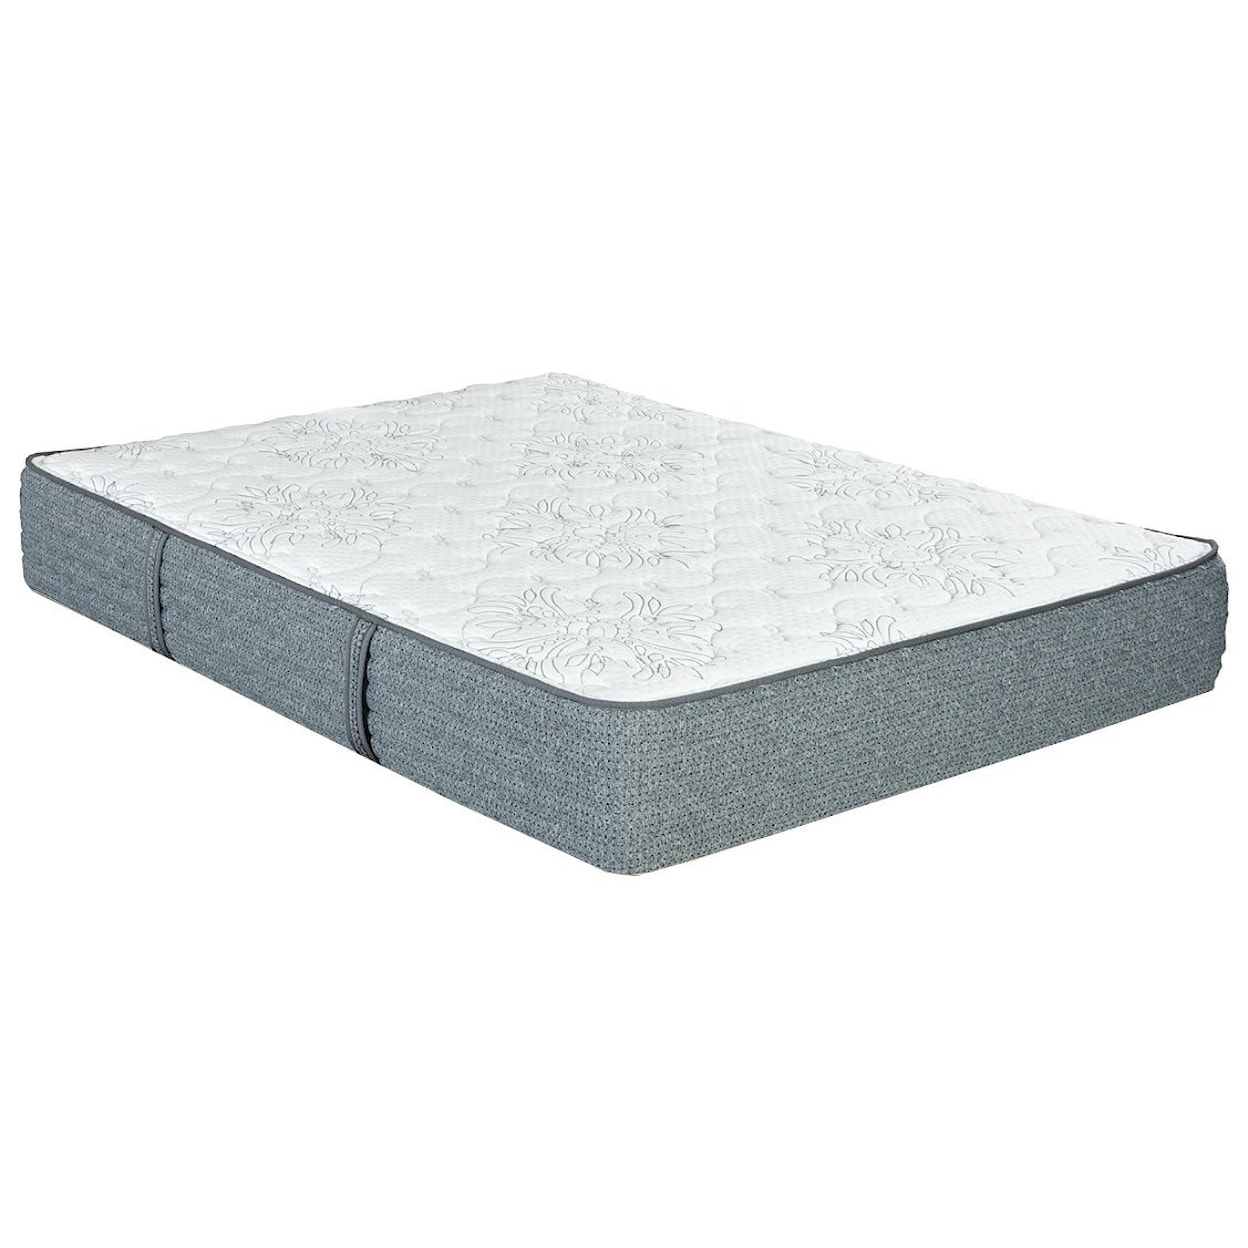 King Koil Laura Ashley Elise X Firm Cal King 11" Extra Firm Mattress